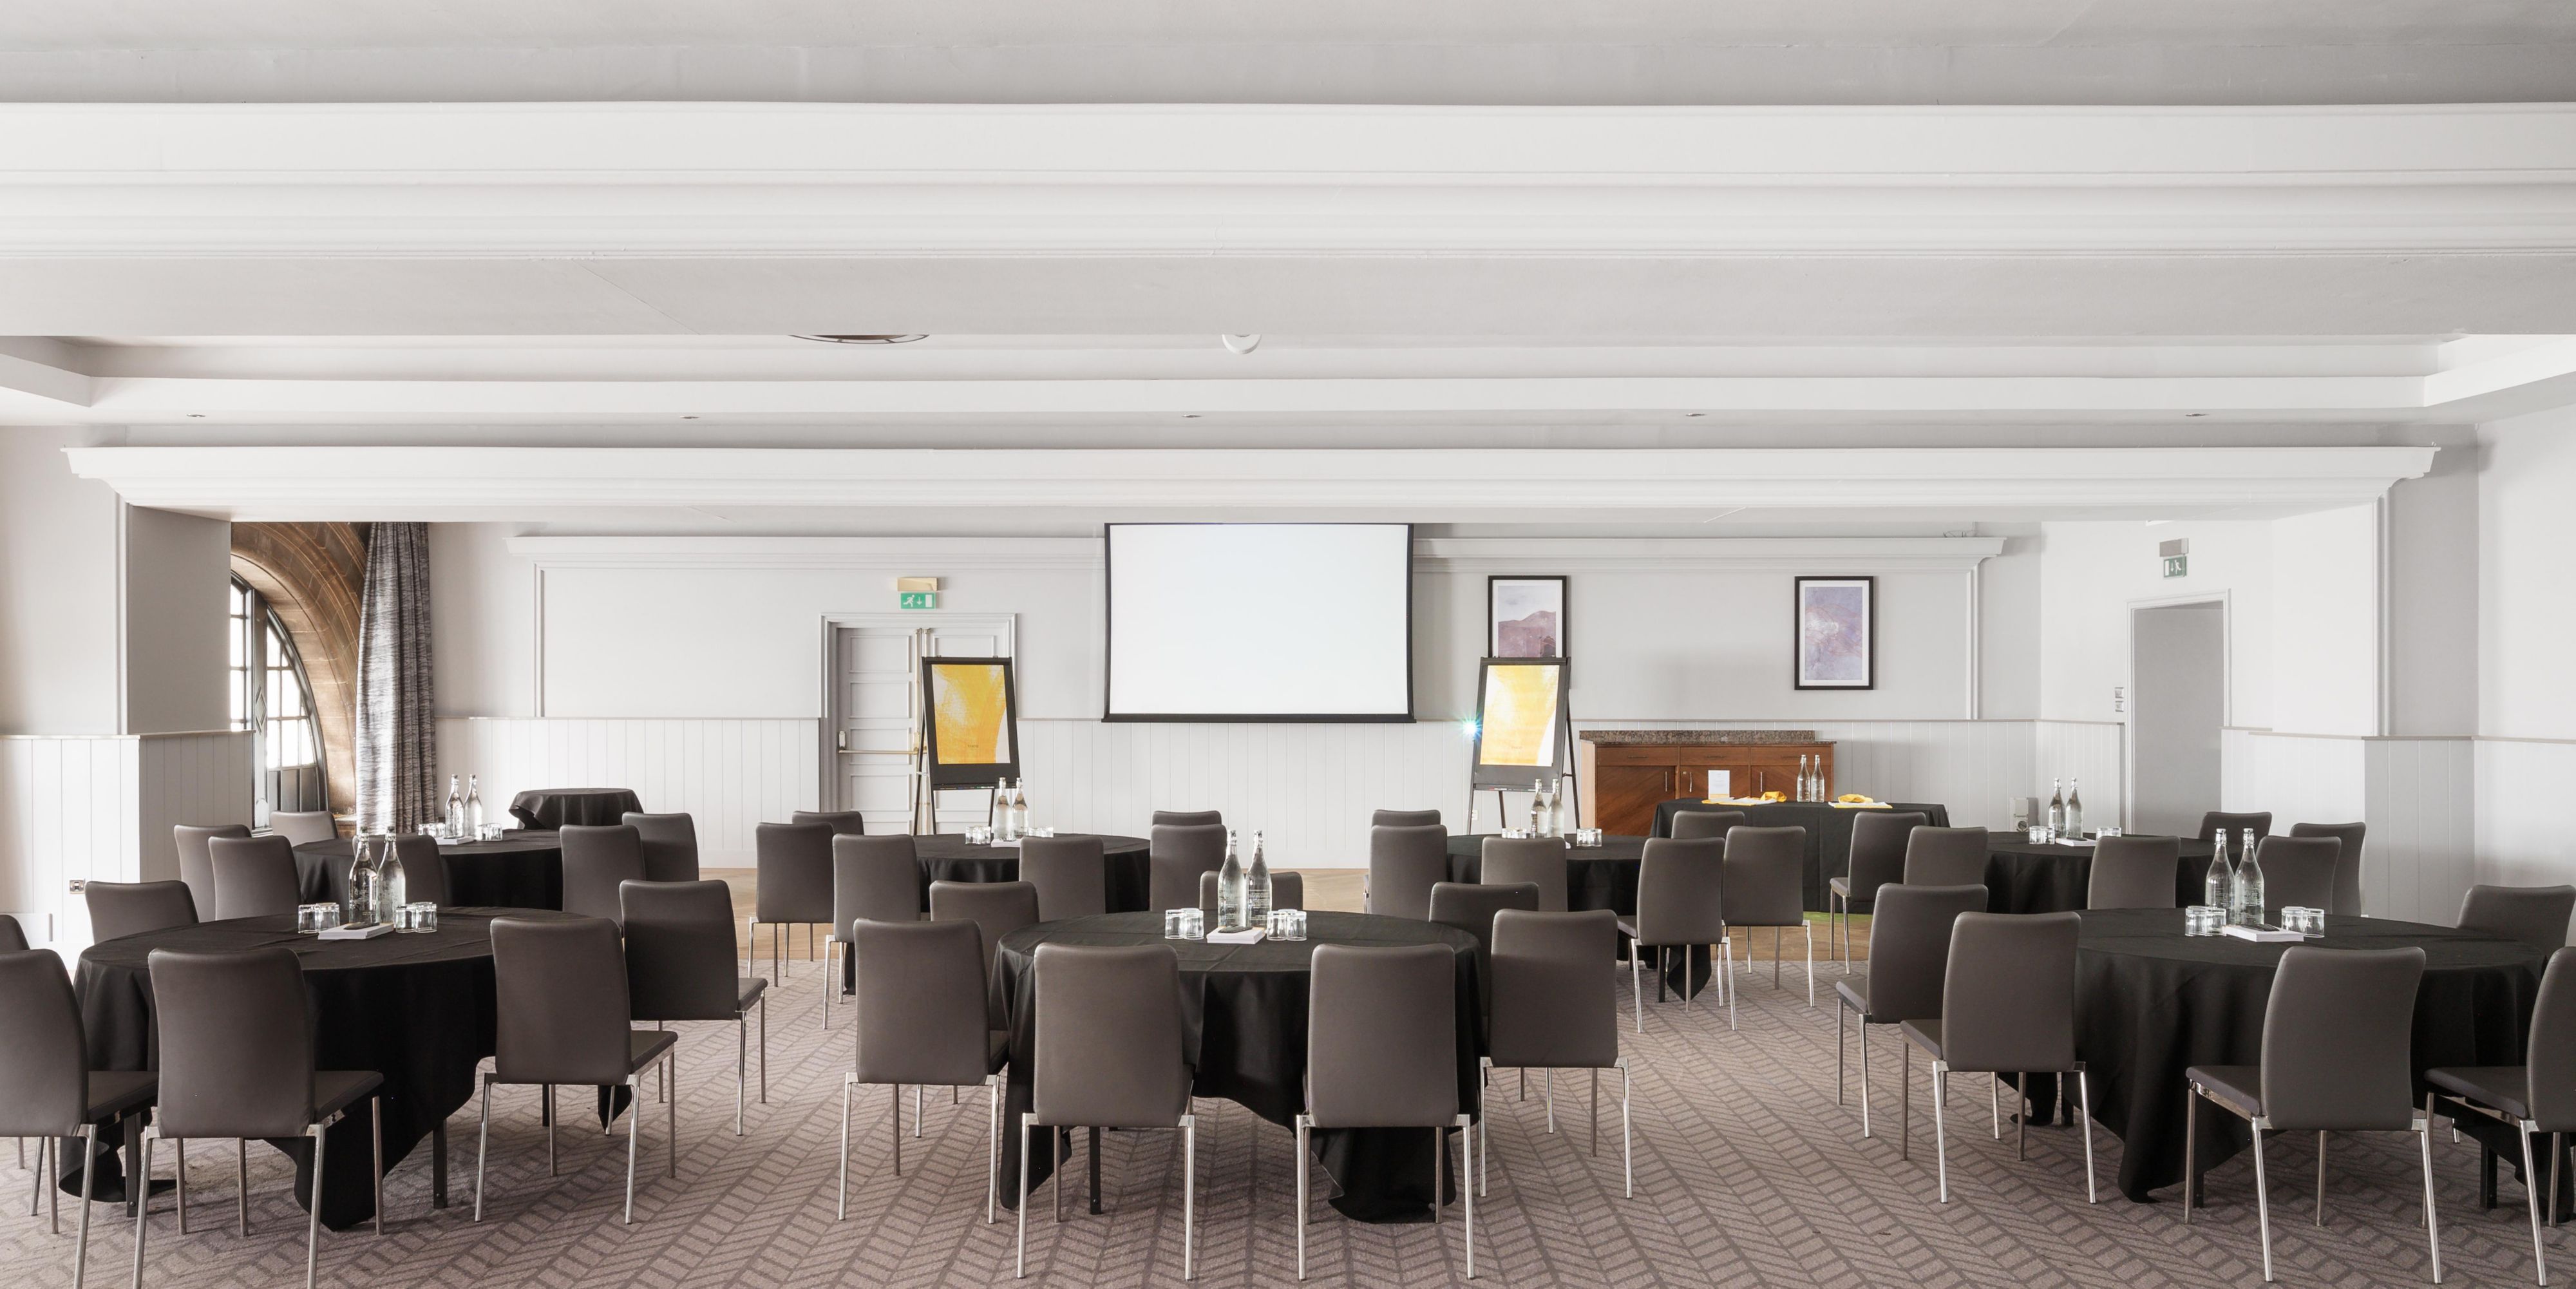 We offer a warm, unstuffy and contemporary place to host your meeting, where you can focus on the bigger picture and leave the finer details to us. Your delegates will appreciate their time here, where they can learn and get to know each other in an inspirational setting, without any pretence.